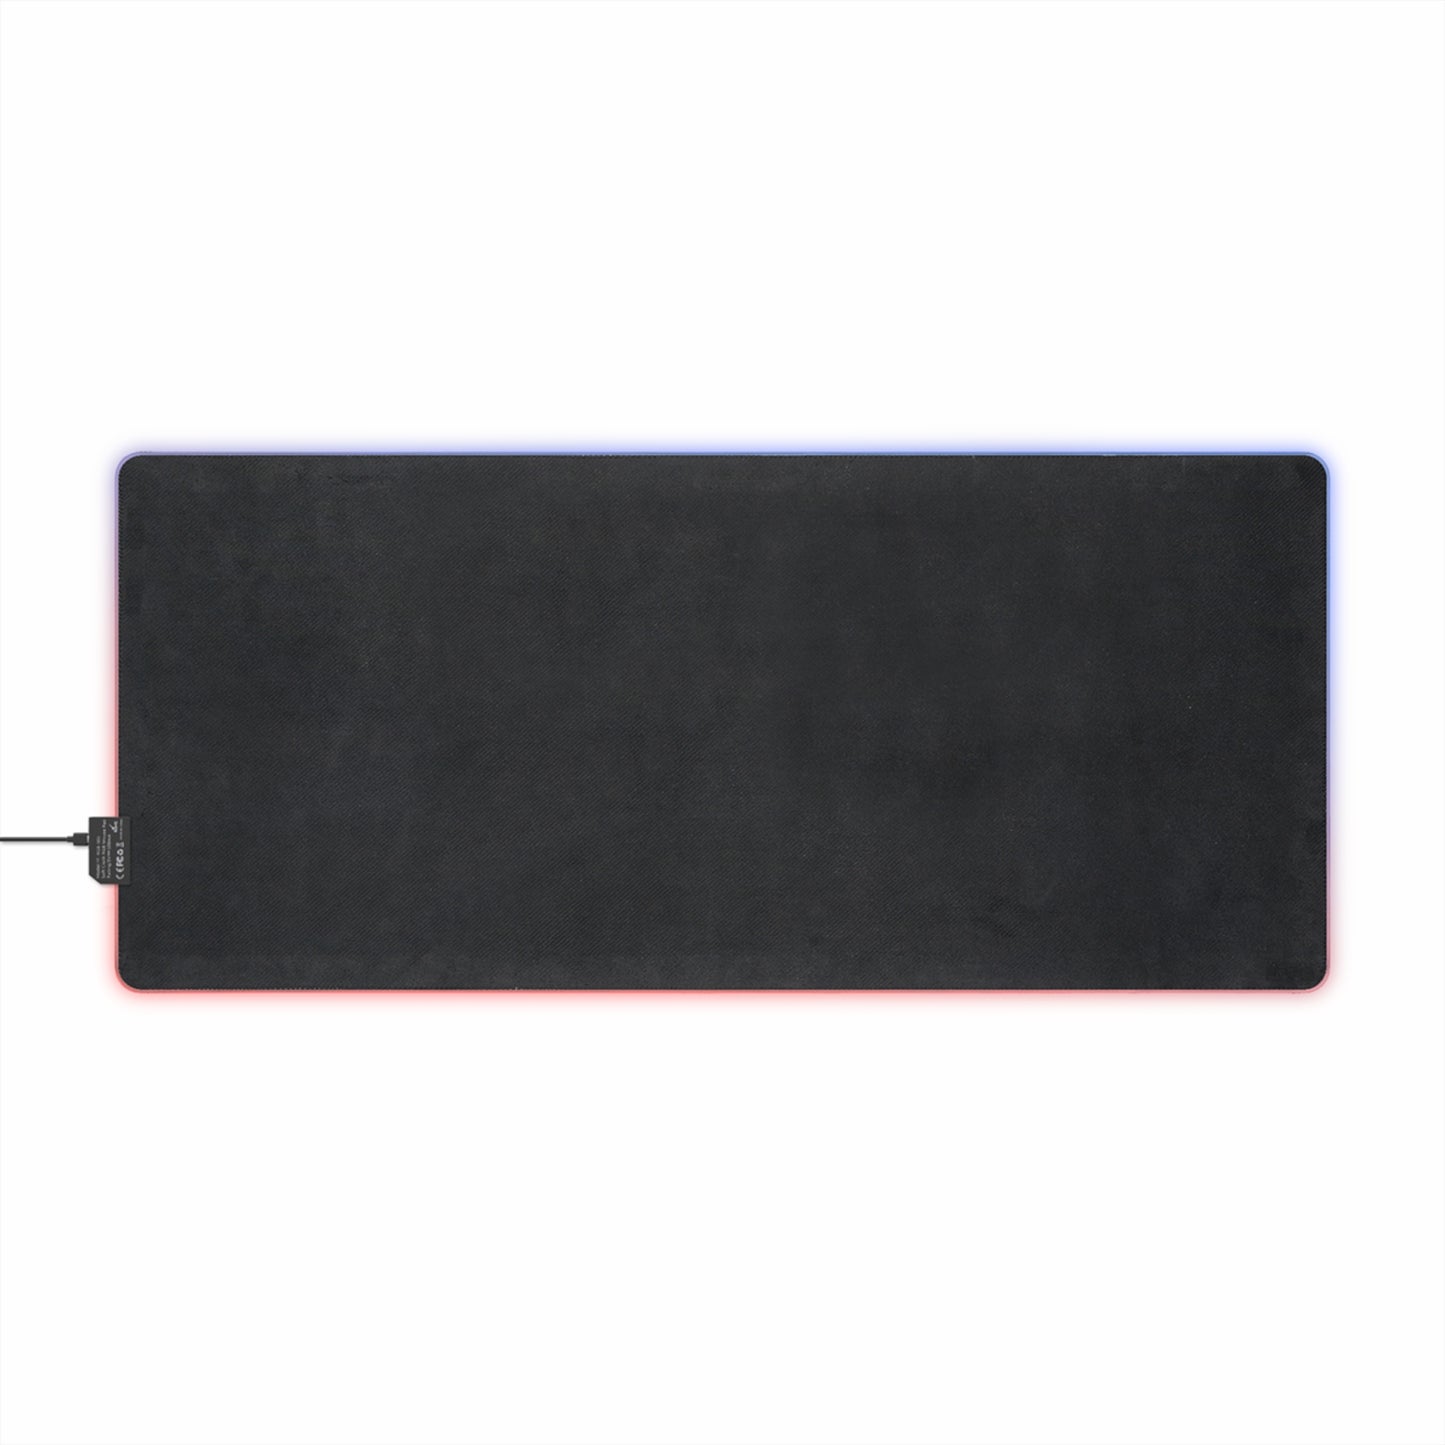 LED Gaming Mouse Pad (PIN Oasis Blue)